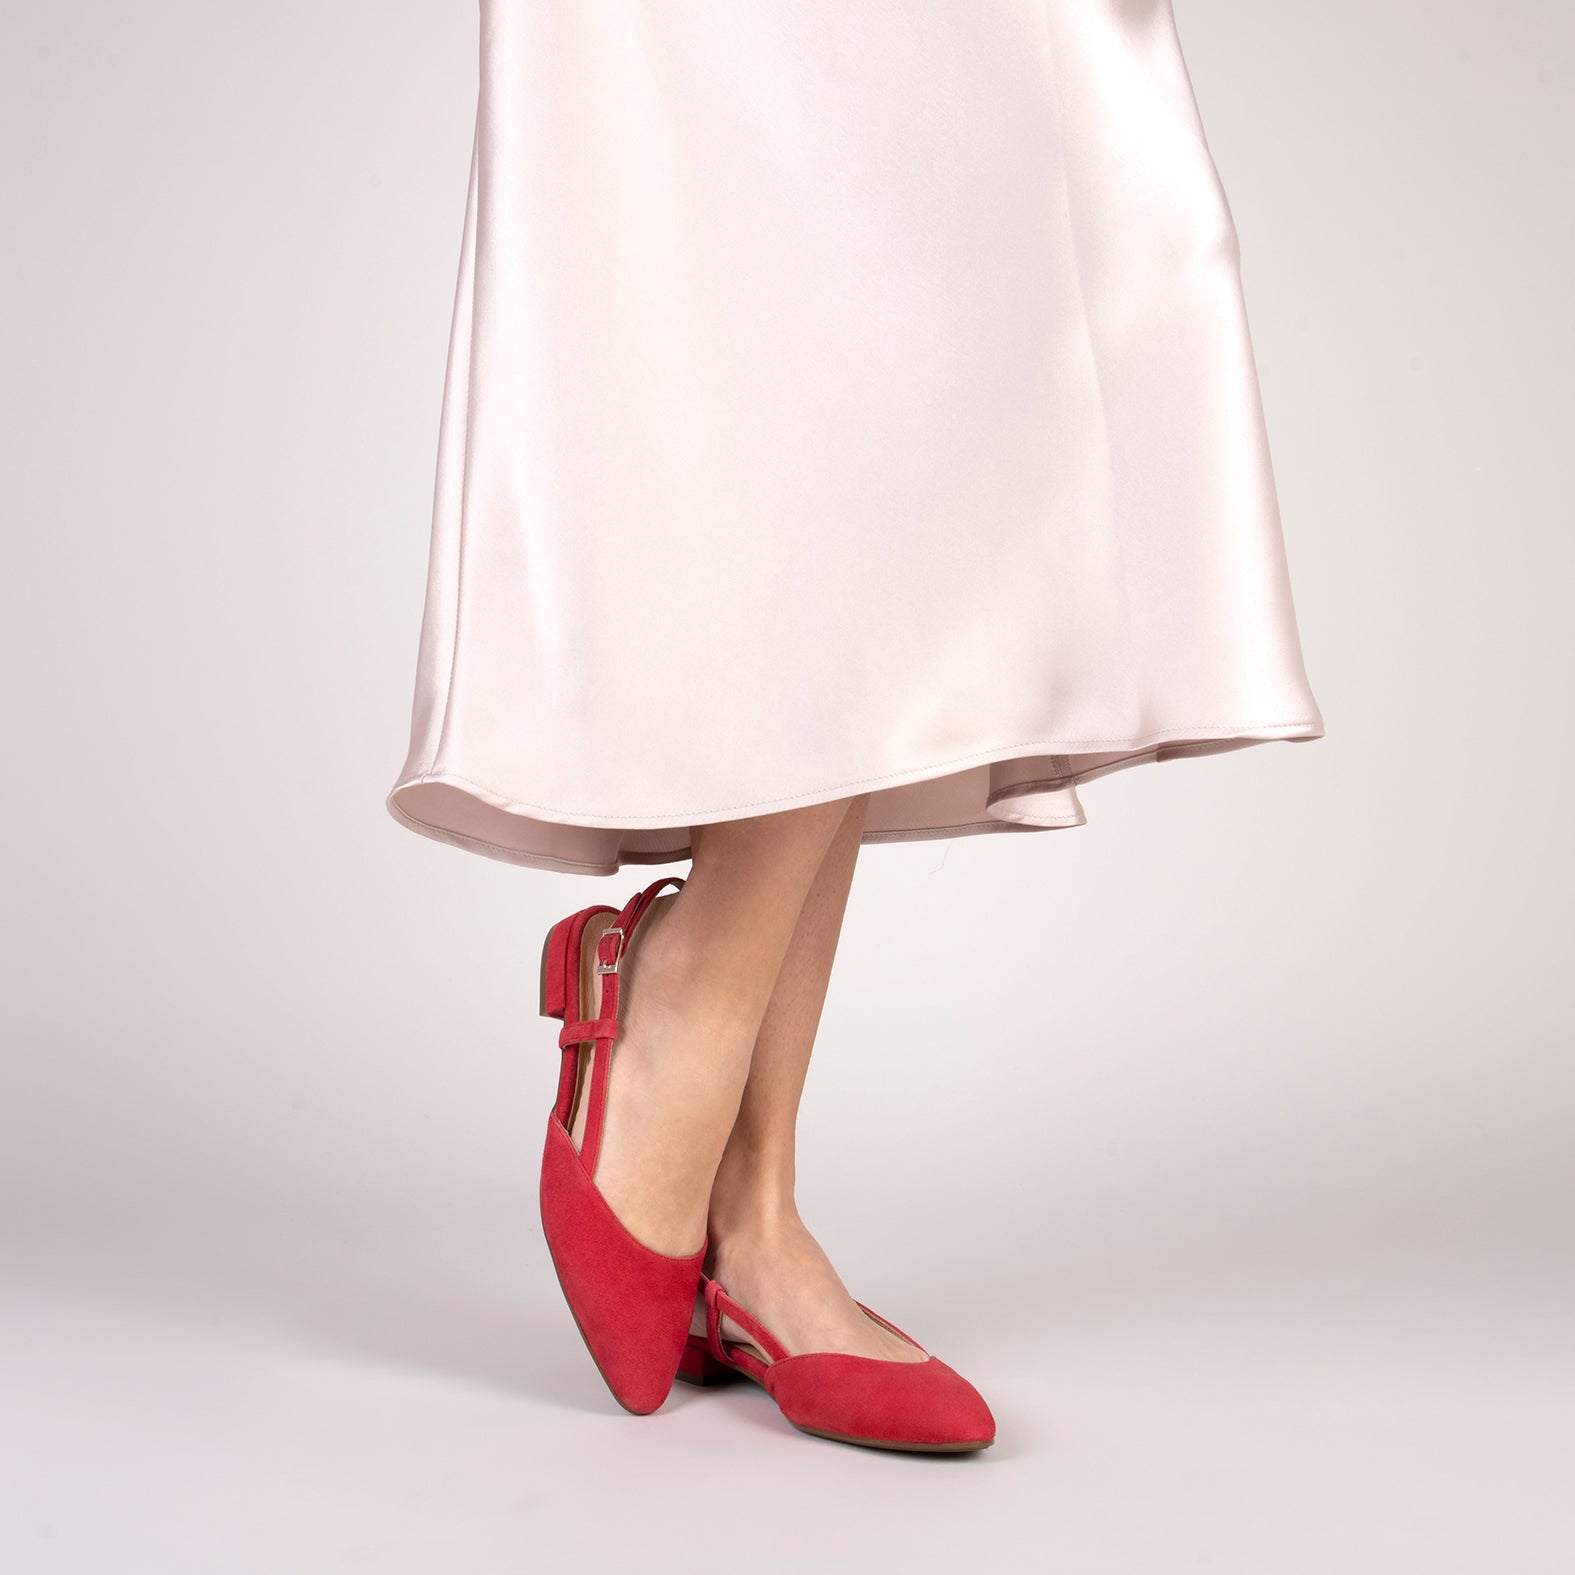 BRUNCH – Chaussures Slingbacks plates ROUGE